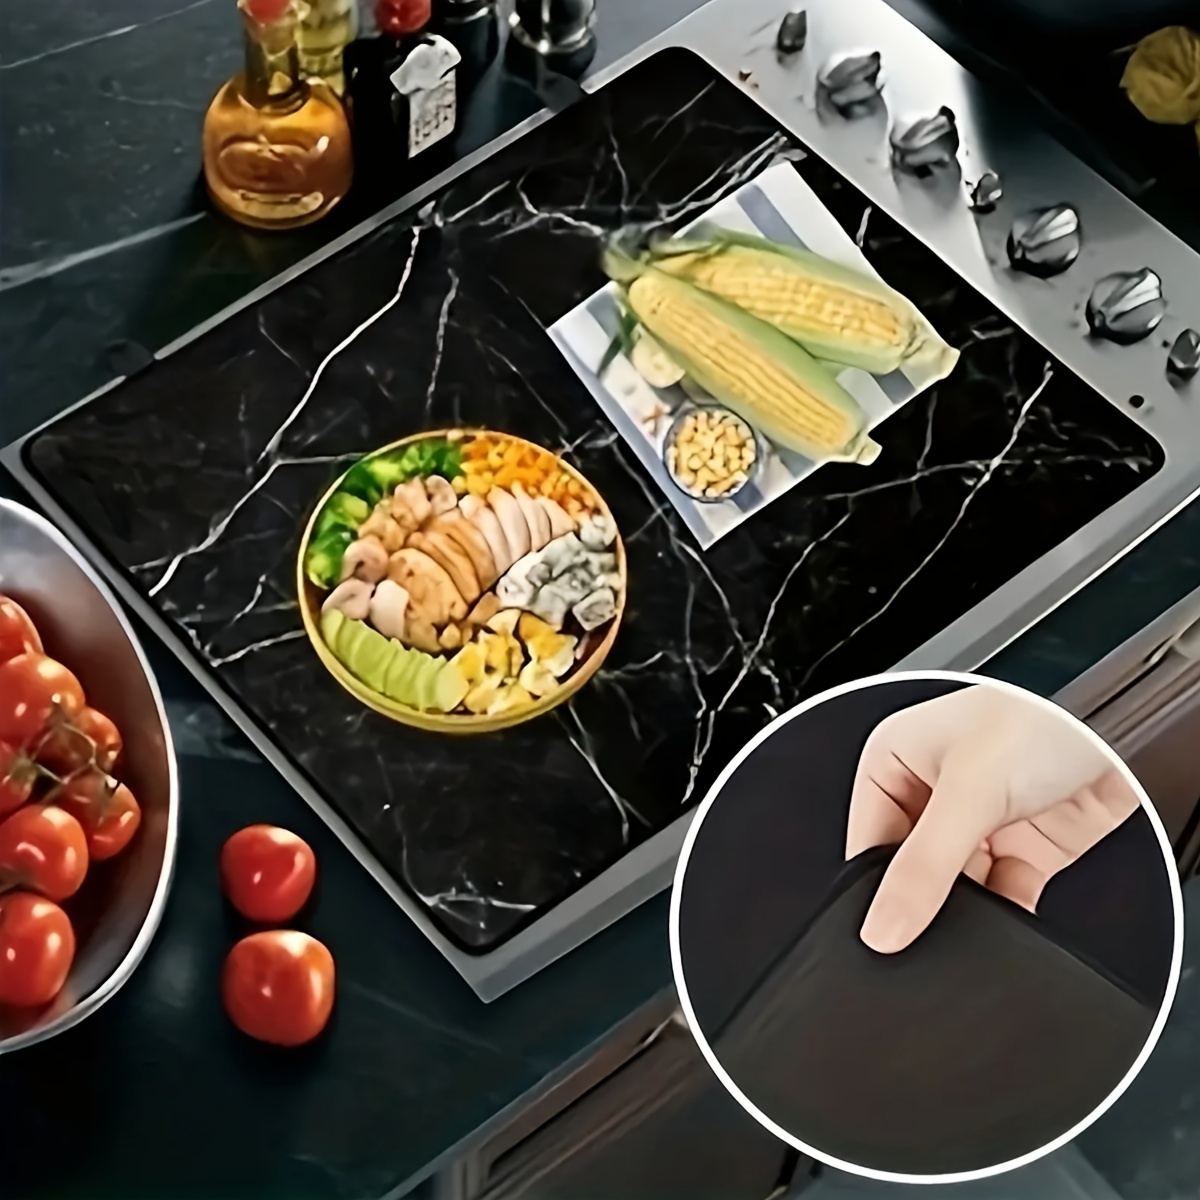  Christmas Stove Top Covers for Electric Stove,Electric Stove  Cover, Glass Top Stove Cover, Ceramic Glass Cooktop Protector, Full Stove  Covers for Electric Stovetop (28.5 x 20.5, B) : Home & Kitchen